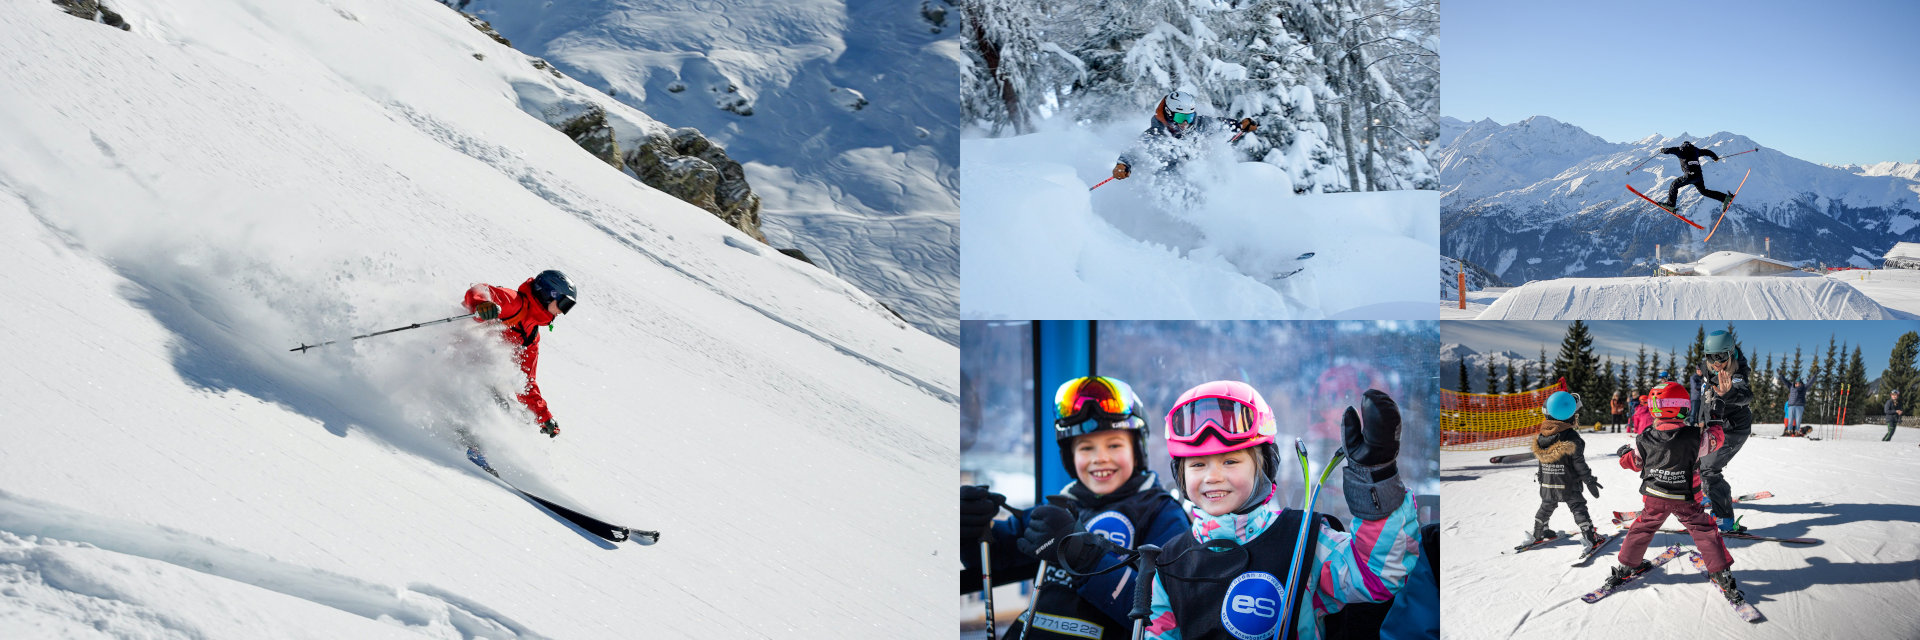 Private ski and snowboard lessons with European Snowsport